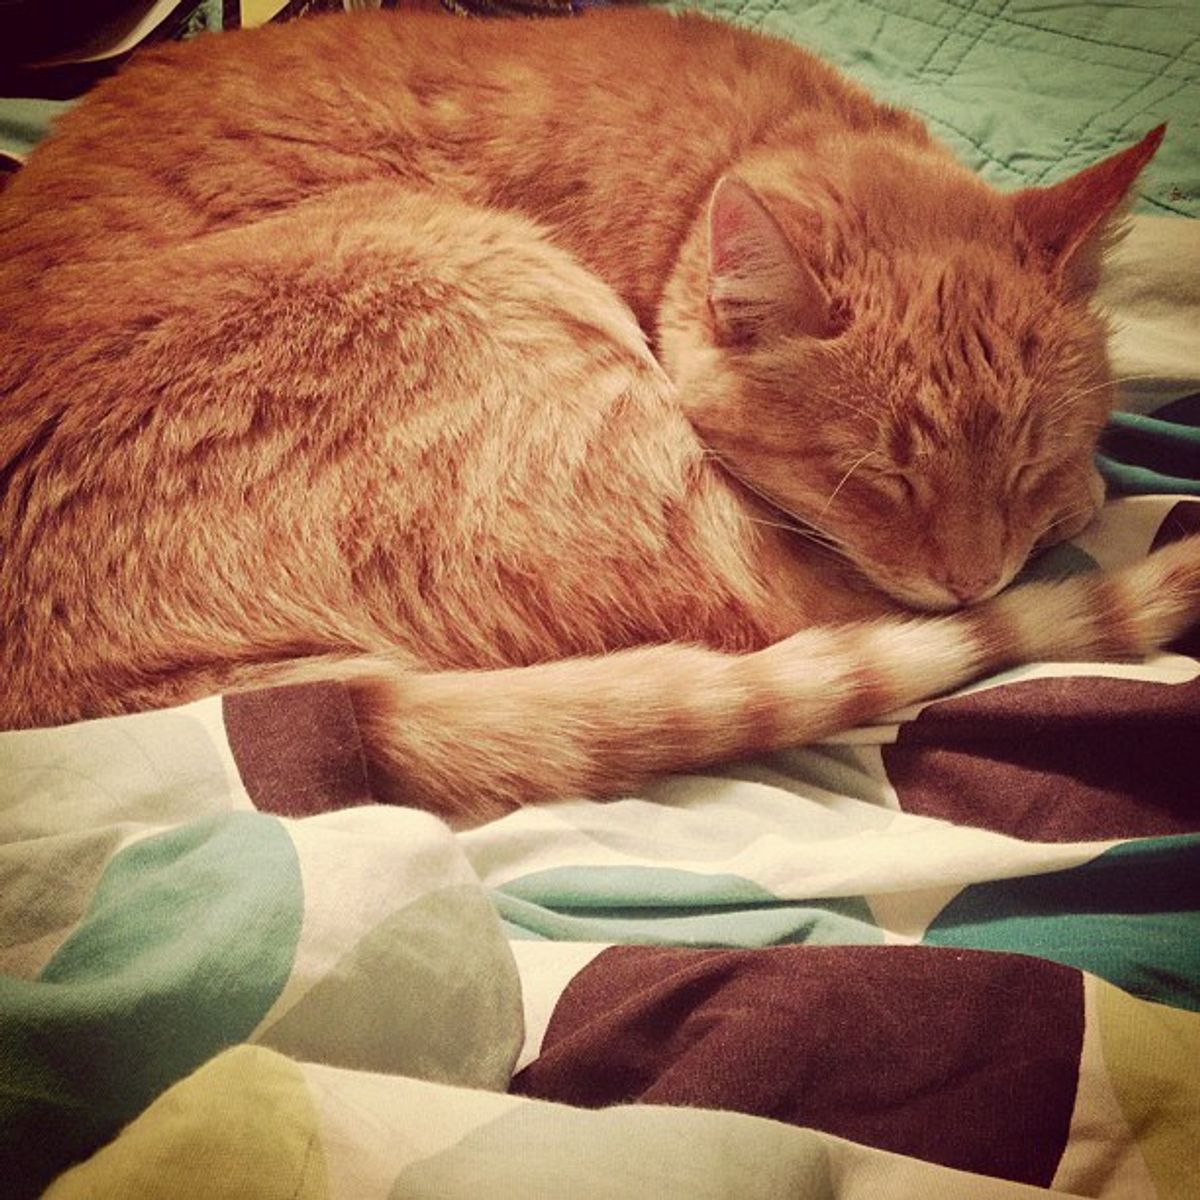 18 Reasons Why Your Cat is Your Best Friend